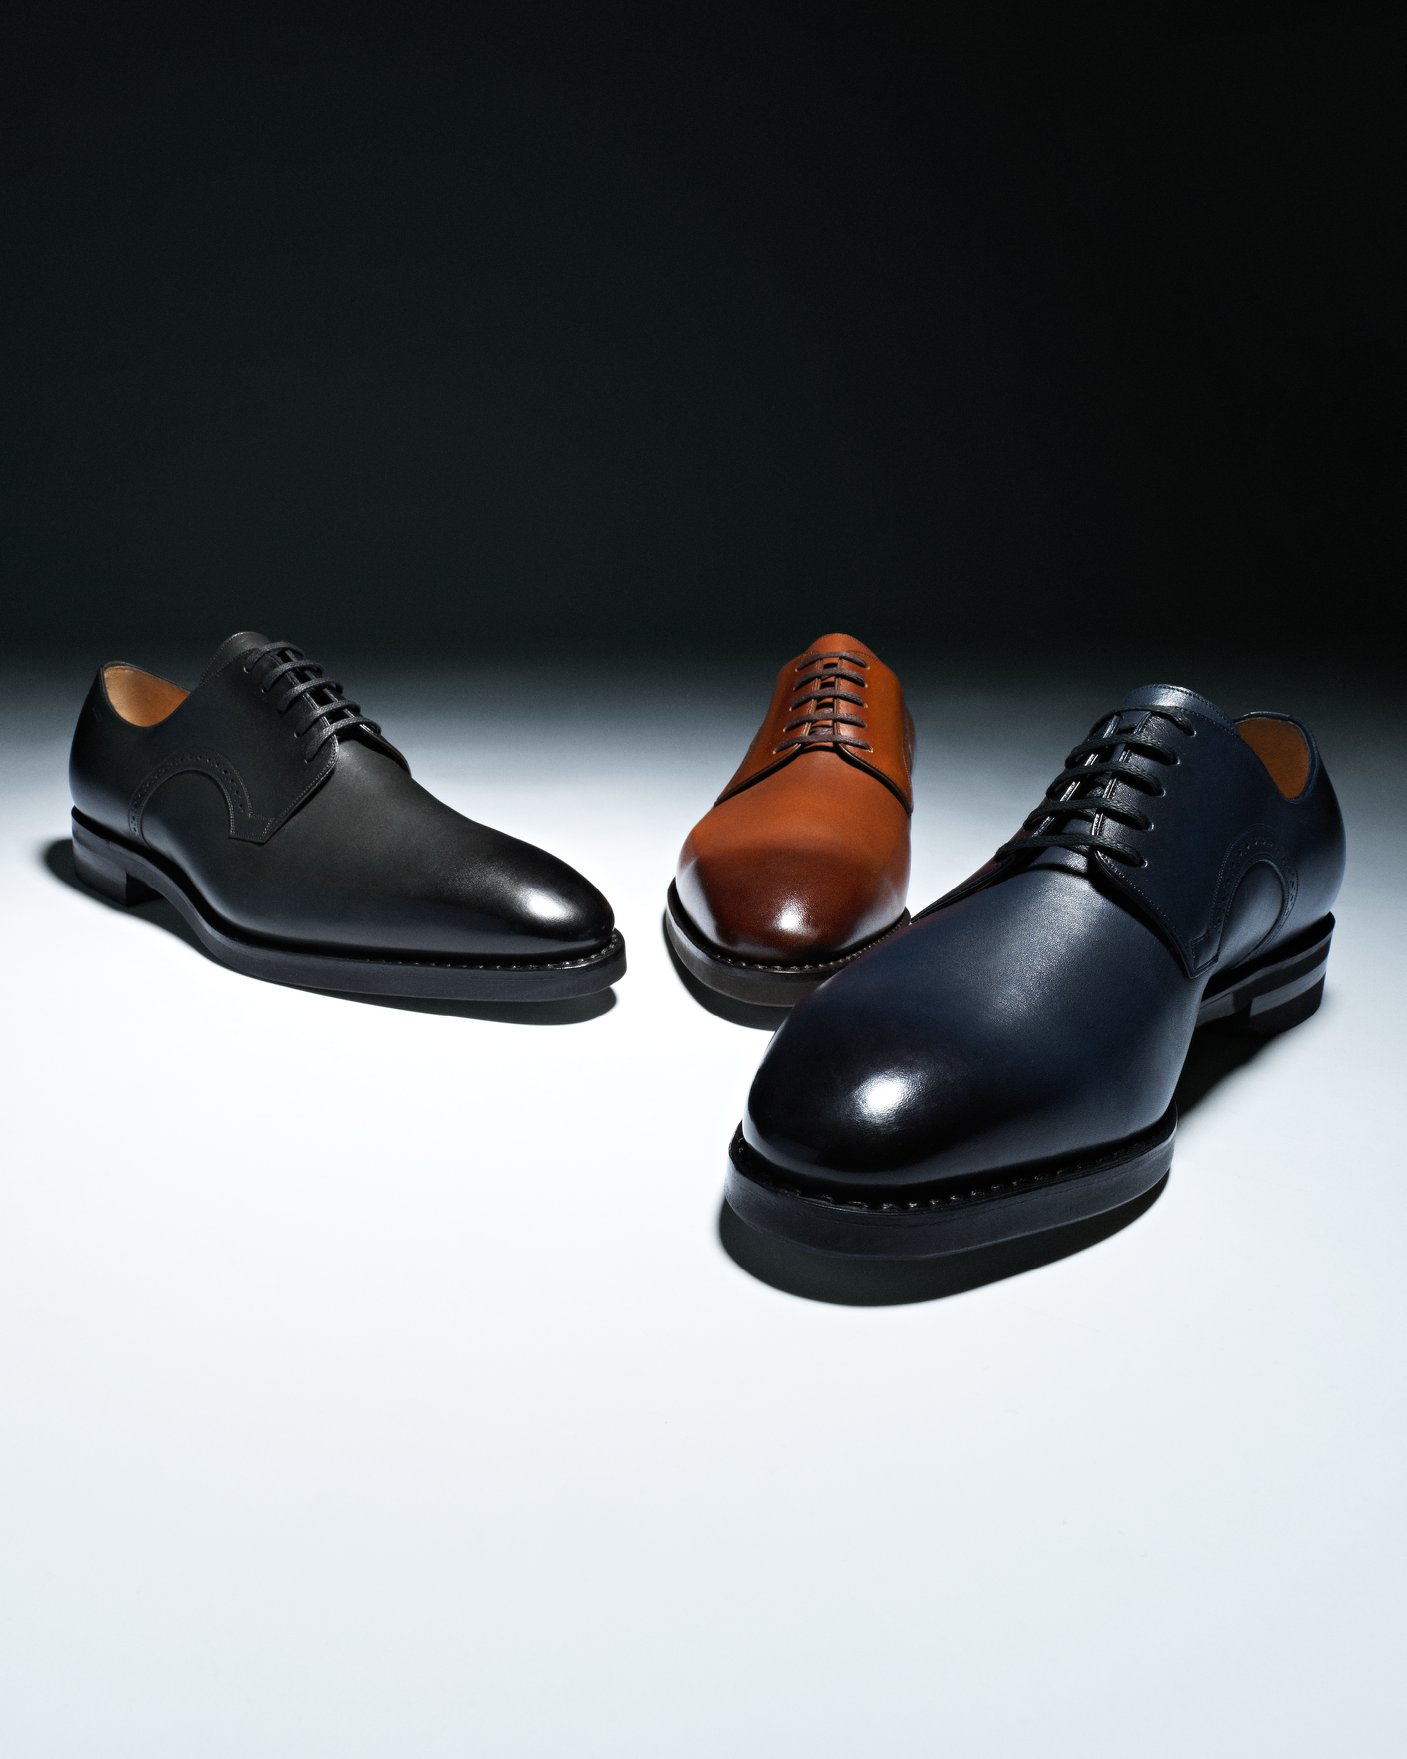 Step right up. Discover the new Scrivani from our Scribe Novo family of iconic formal shoes, now available on.bally.com/ScribeNovo.